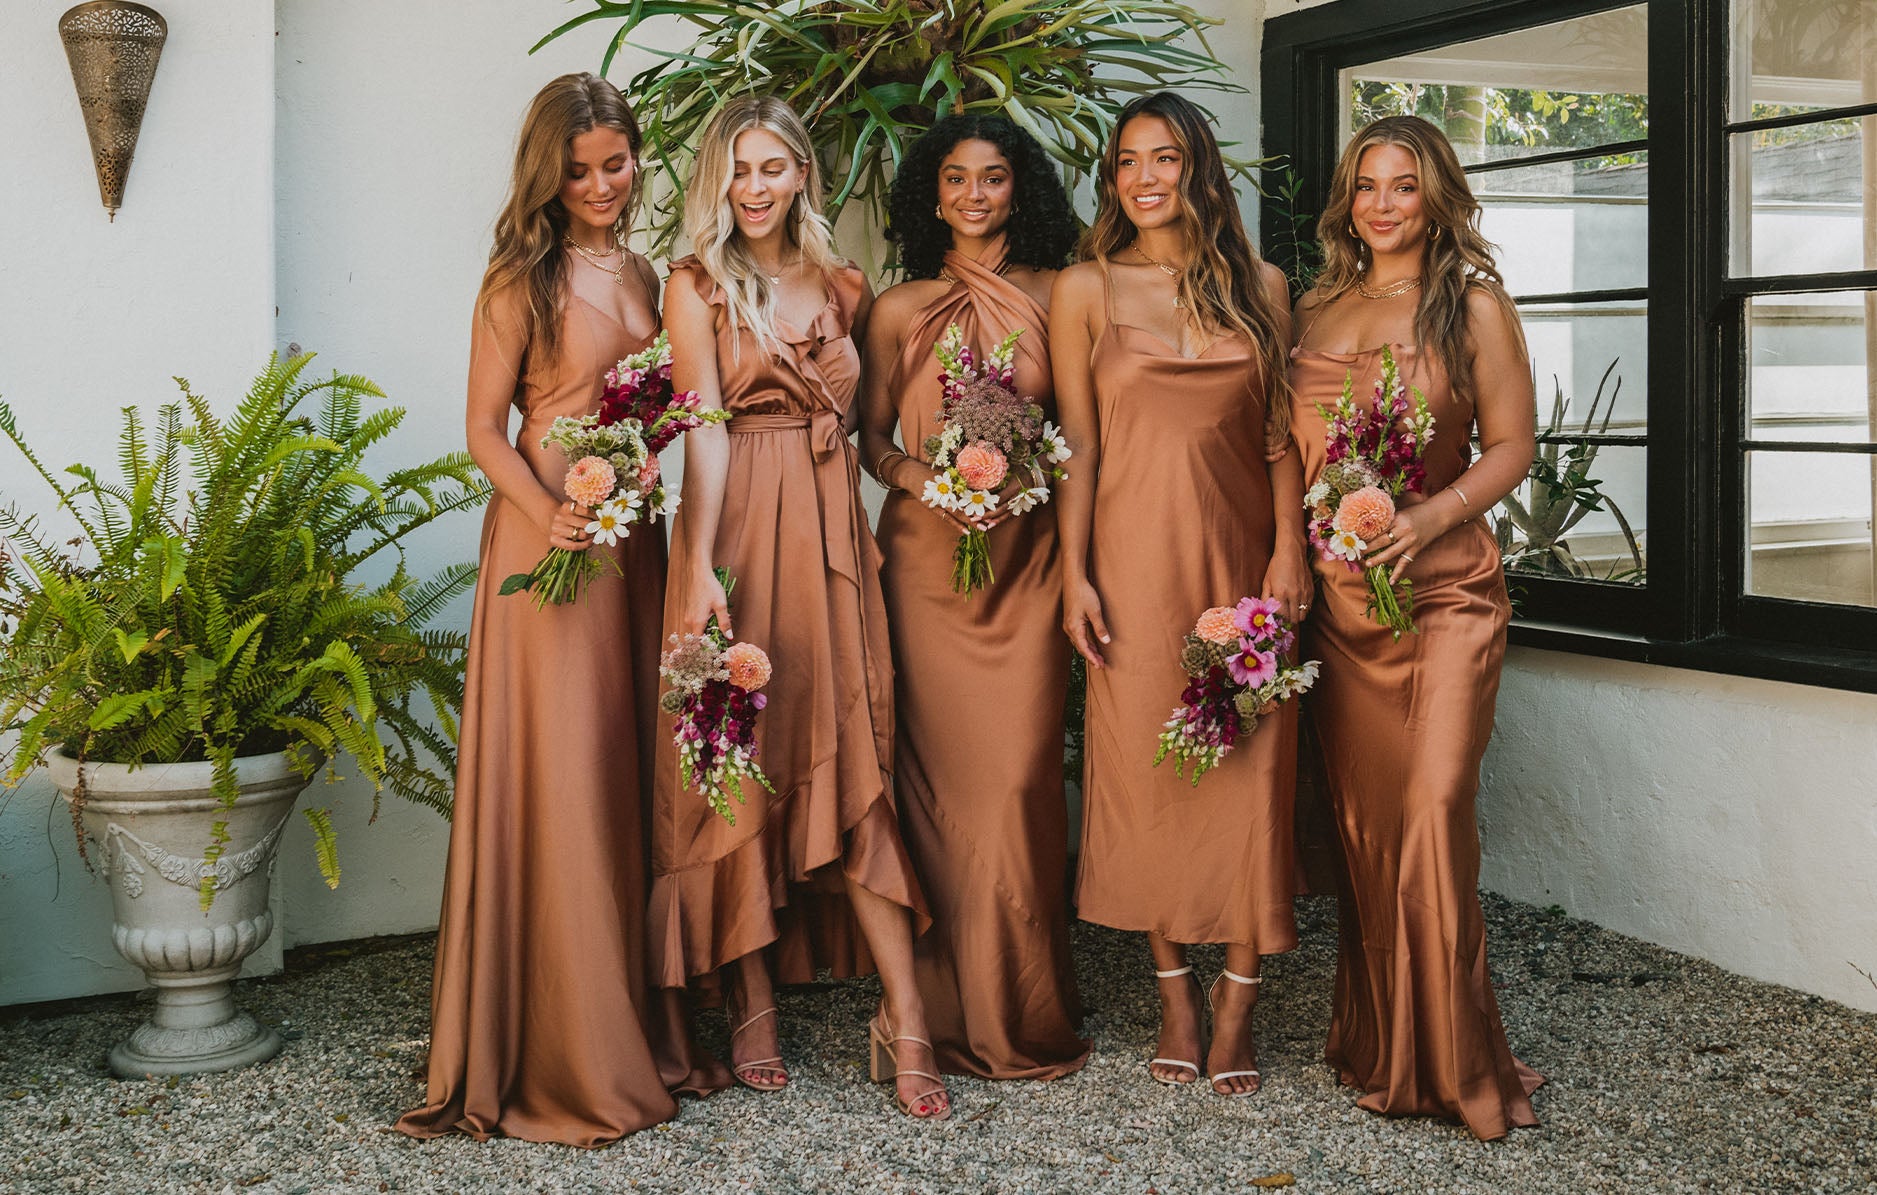 Luxe Rust Colored Bridesmaid Dresses We're Loving – Wedding Shoppe